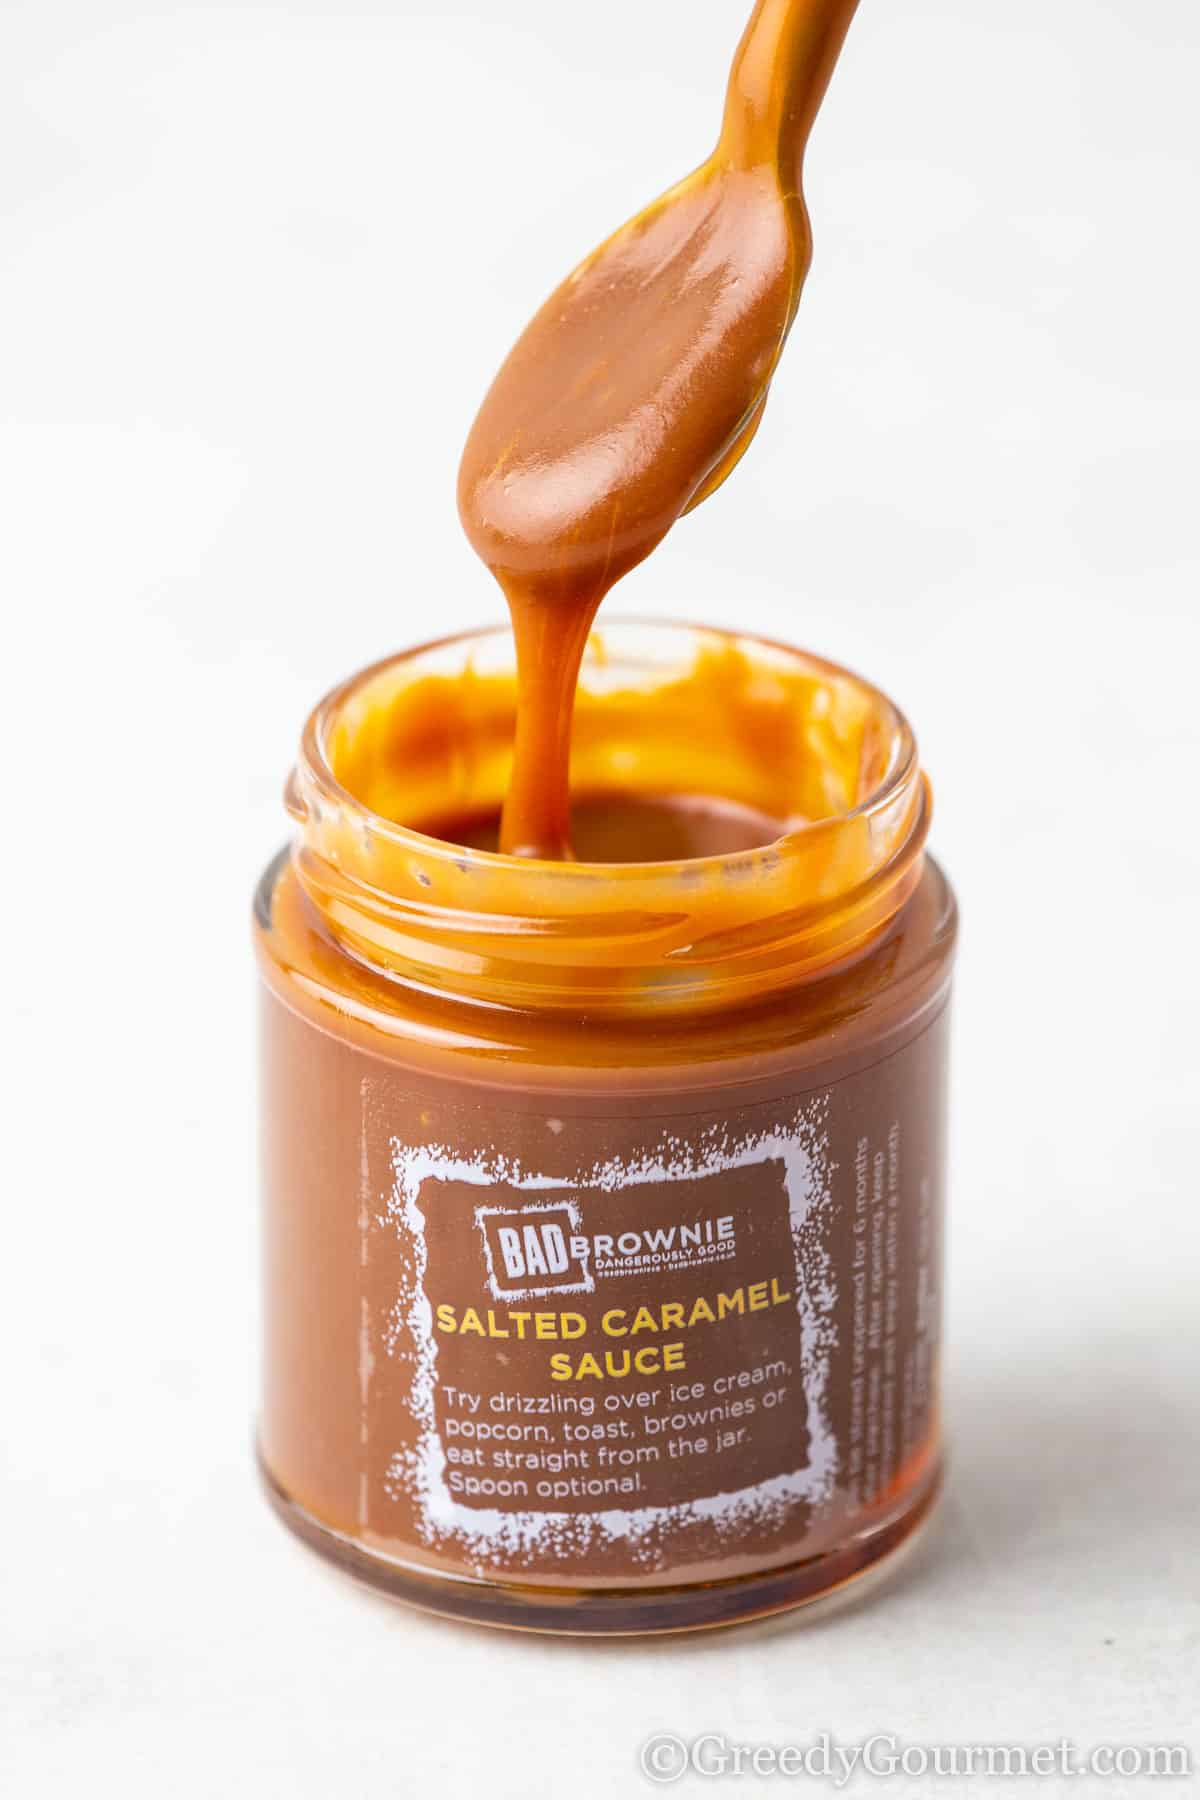 A jar of bad brownie salted caramel sauce with a wooden spoon